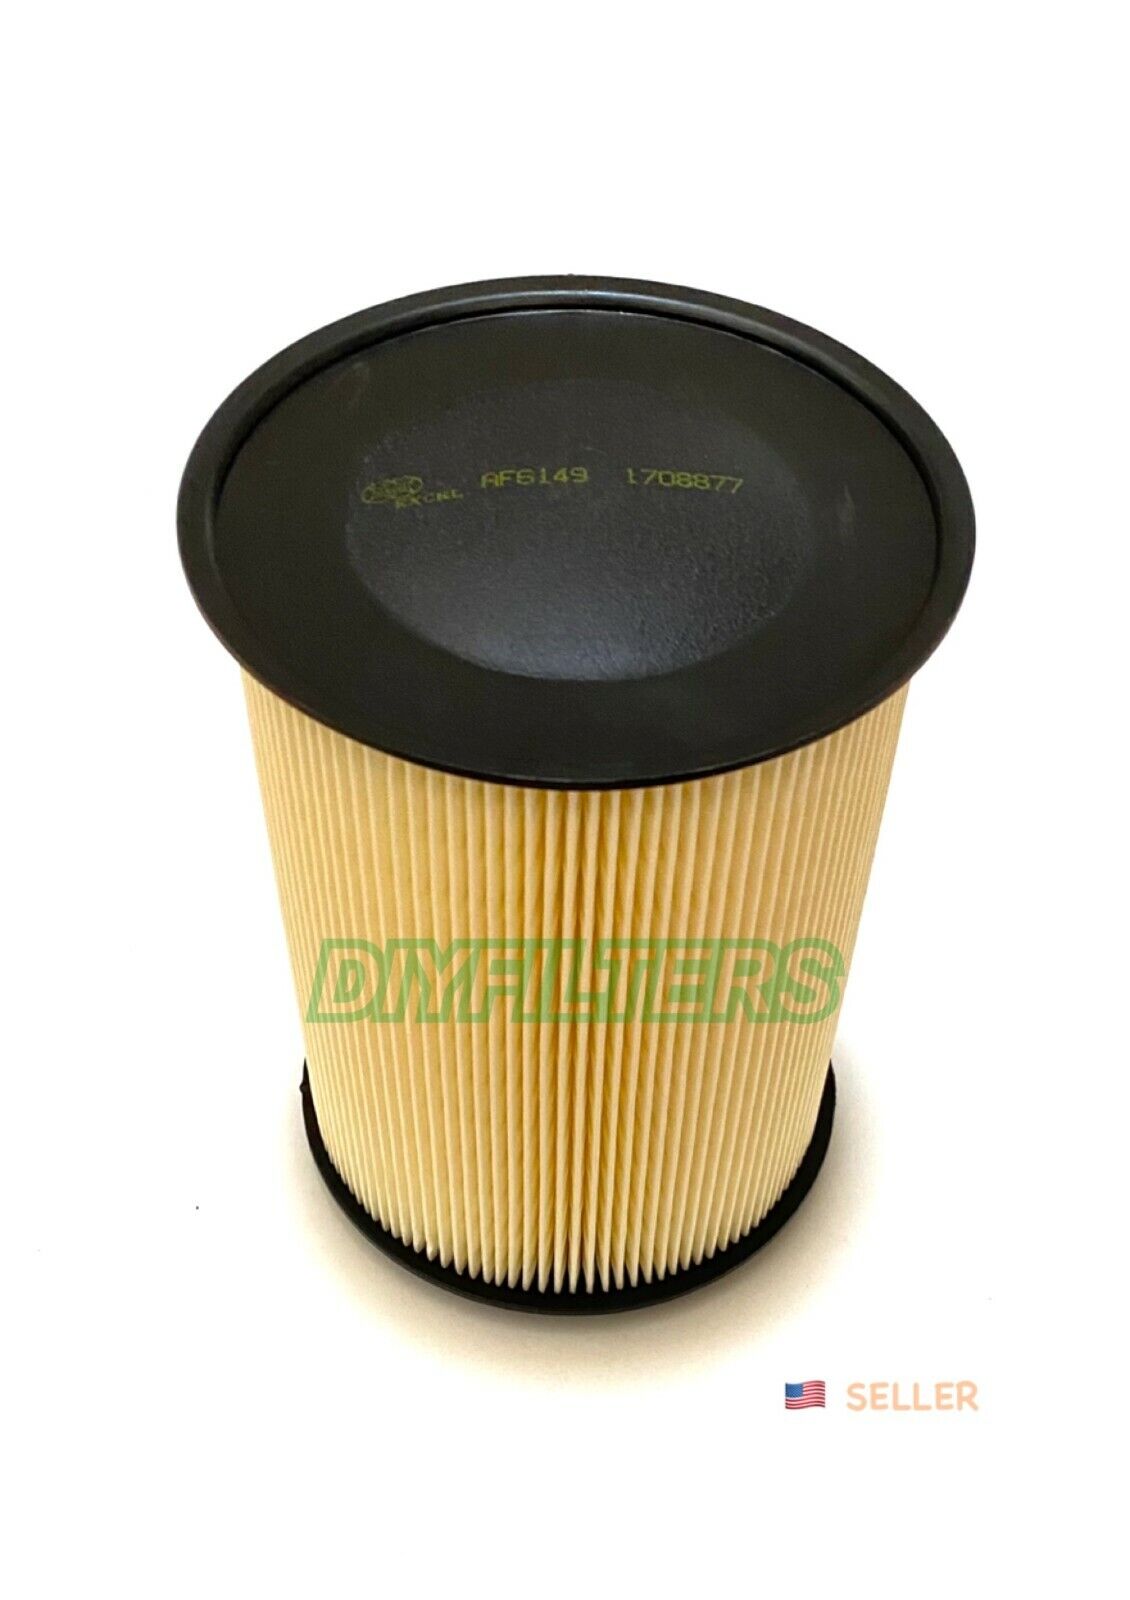 Engine Air Filter for 2013 - 2019 Ford Escape 2015 - 2019 Lincoln MKC US Seller